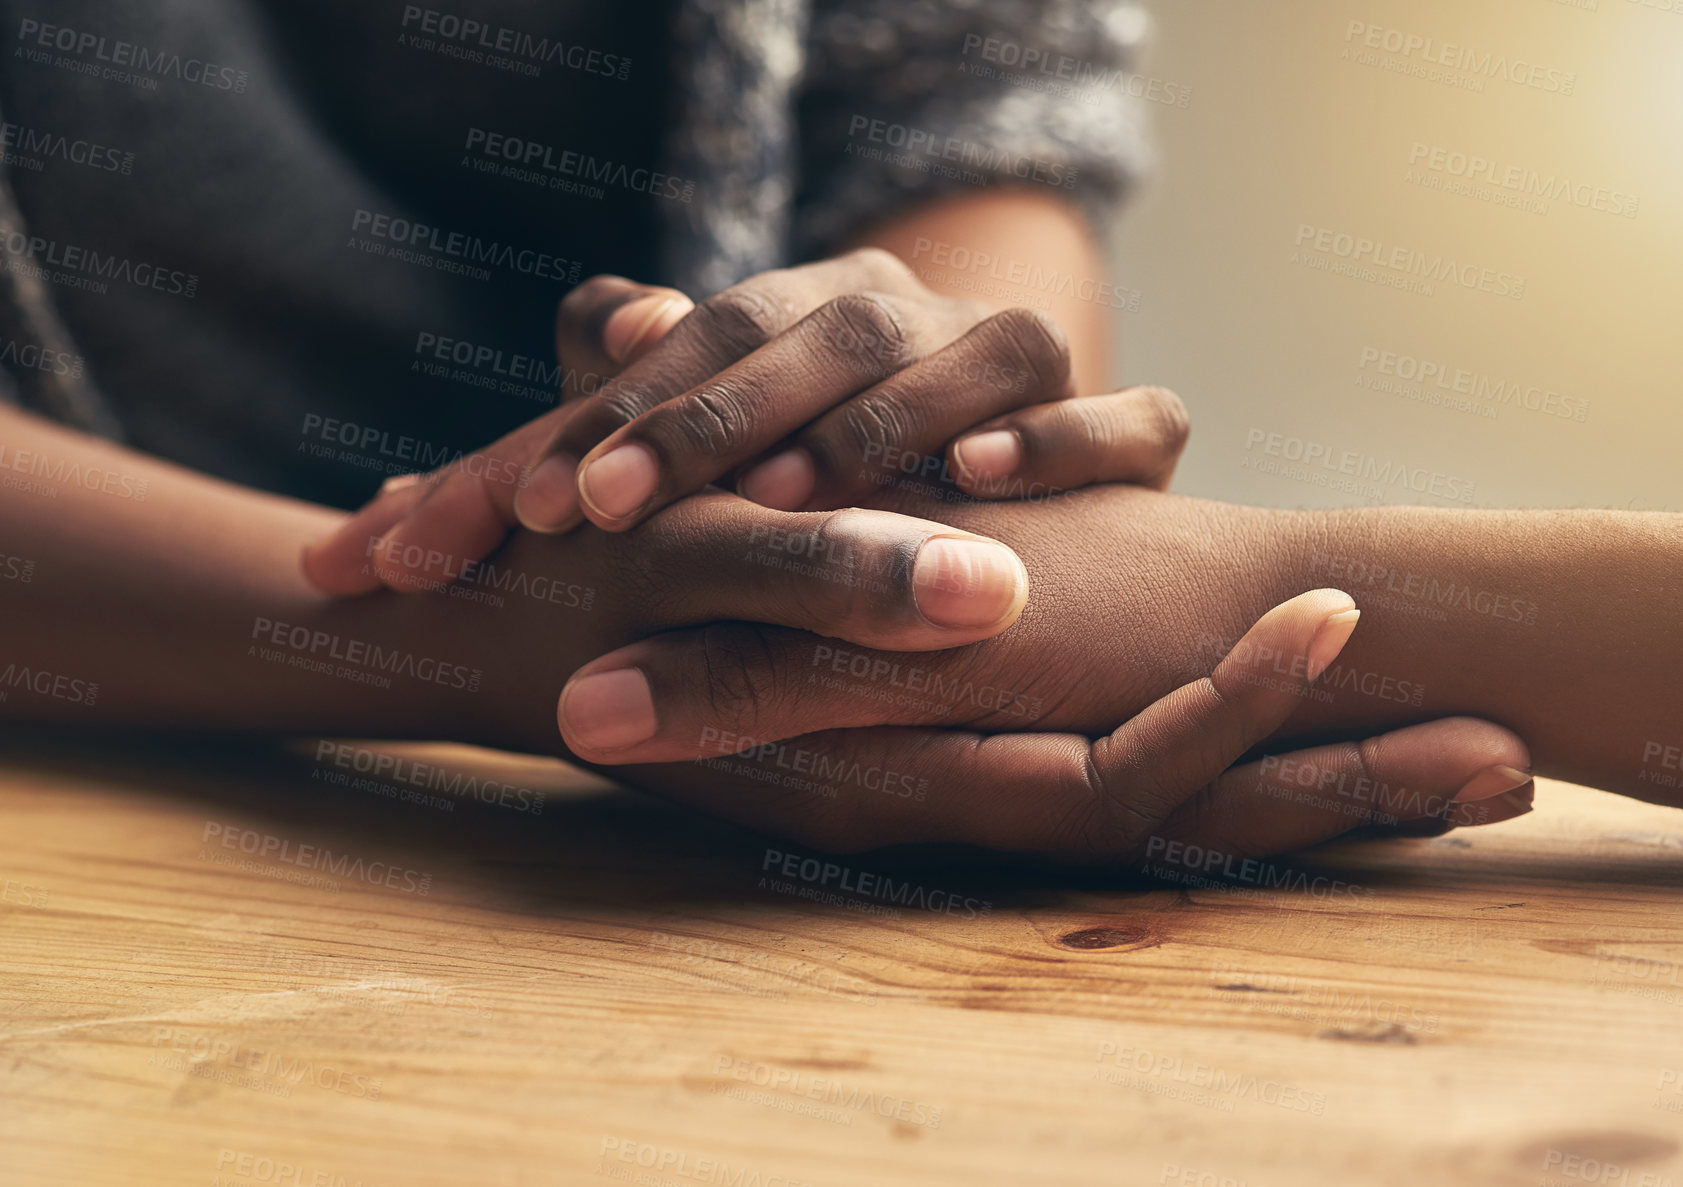 Buy stock photo Comfort, sympathy and people holding hands for unity, compassion and cancer support at wood table. Empathy, care and couple or friends with affection in bonding moment together for grief and loss.